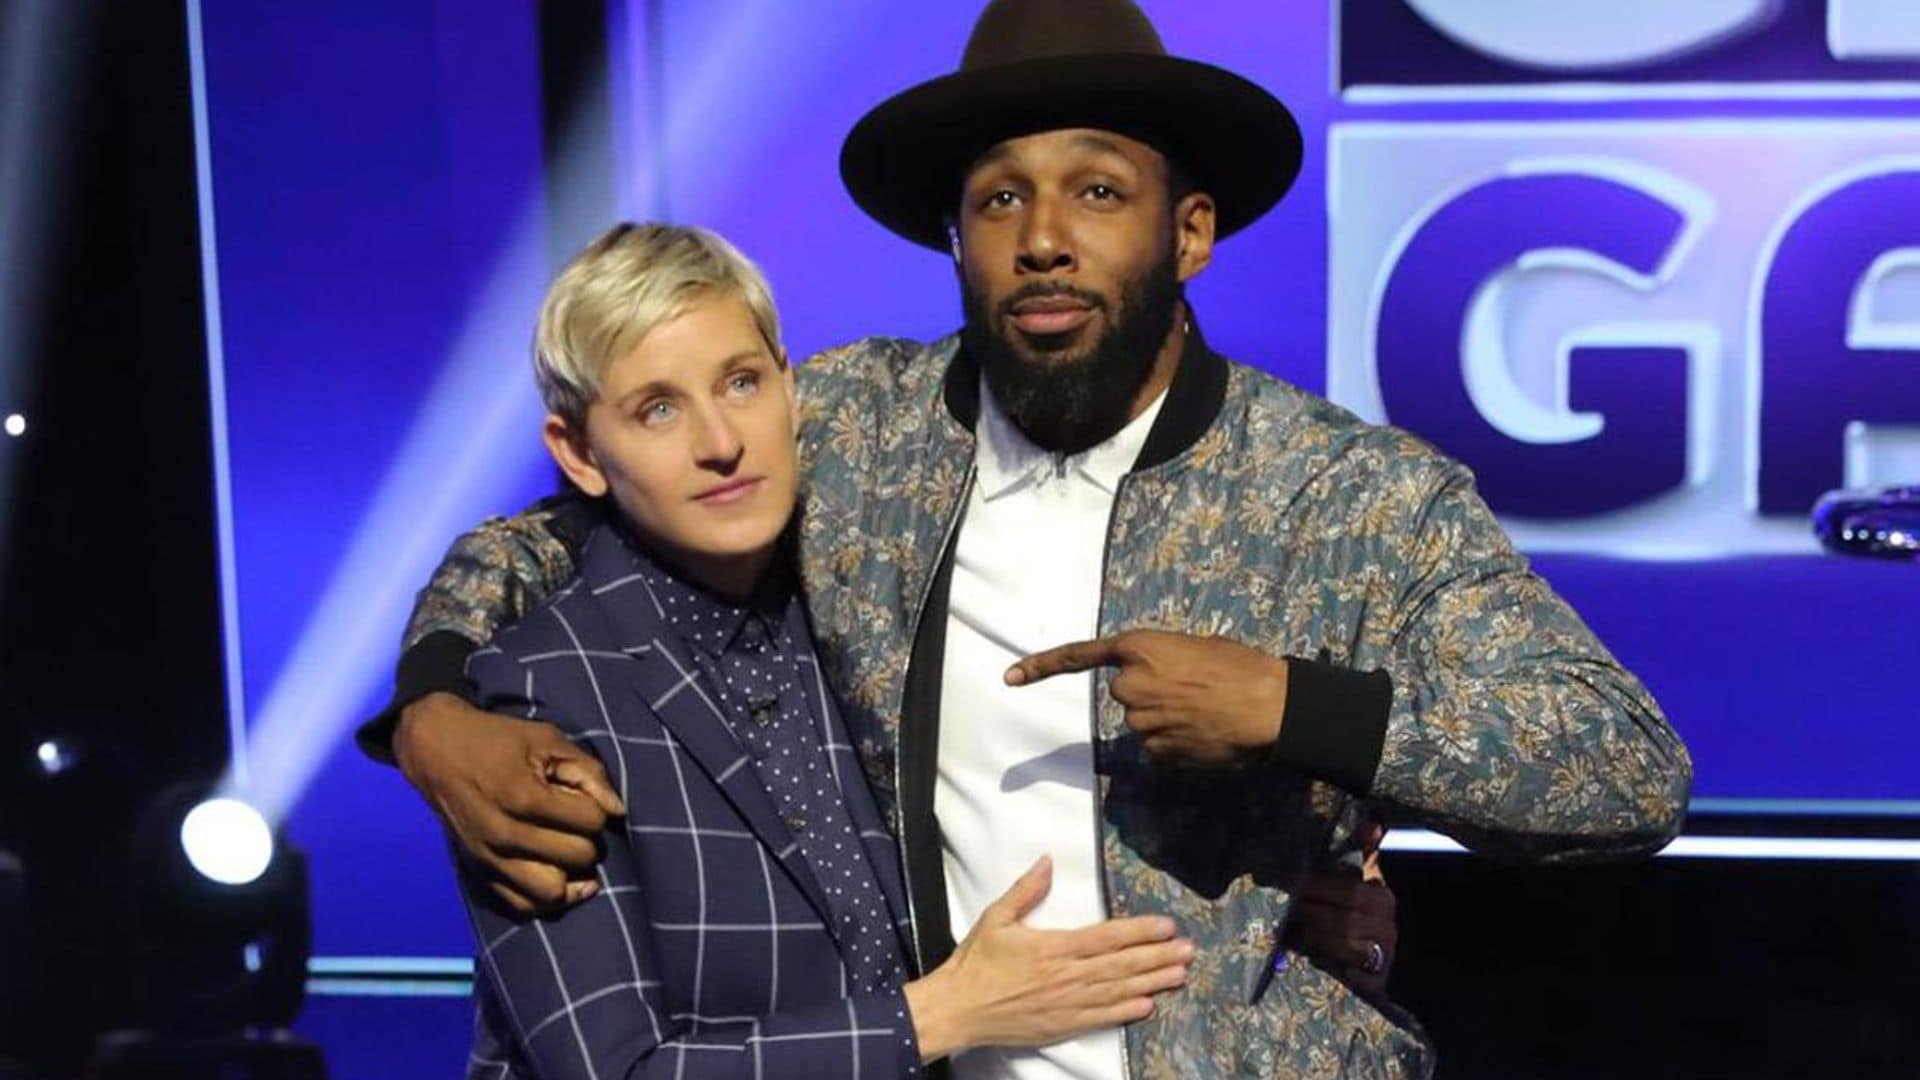 Ellen DeGeneres shares memories with Stephen “tWitch” Boss on the anniversary of his death